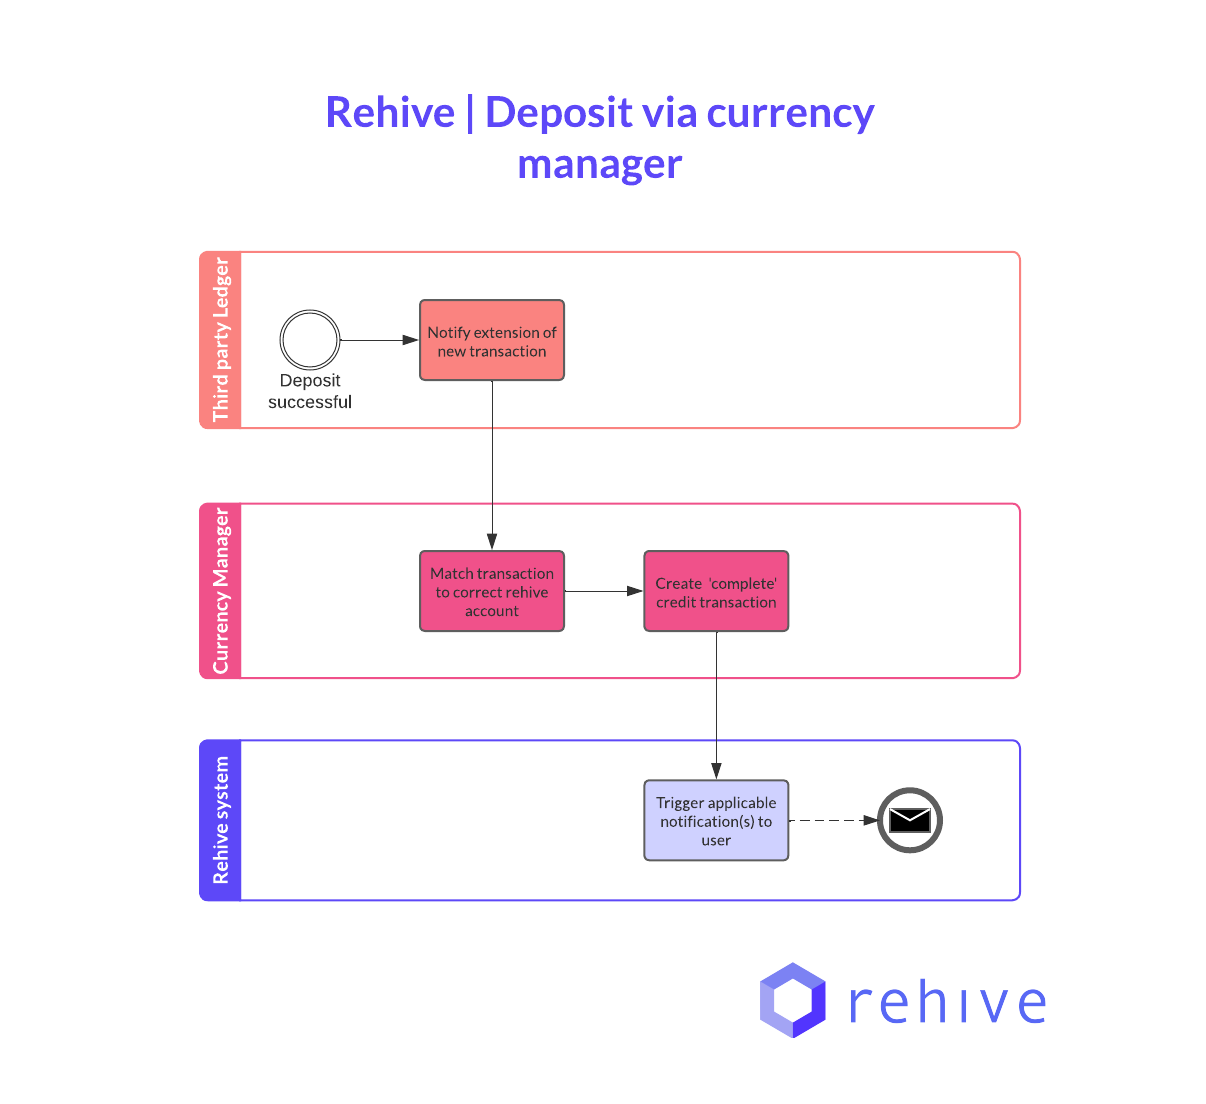 Currency manager deposit image